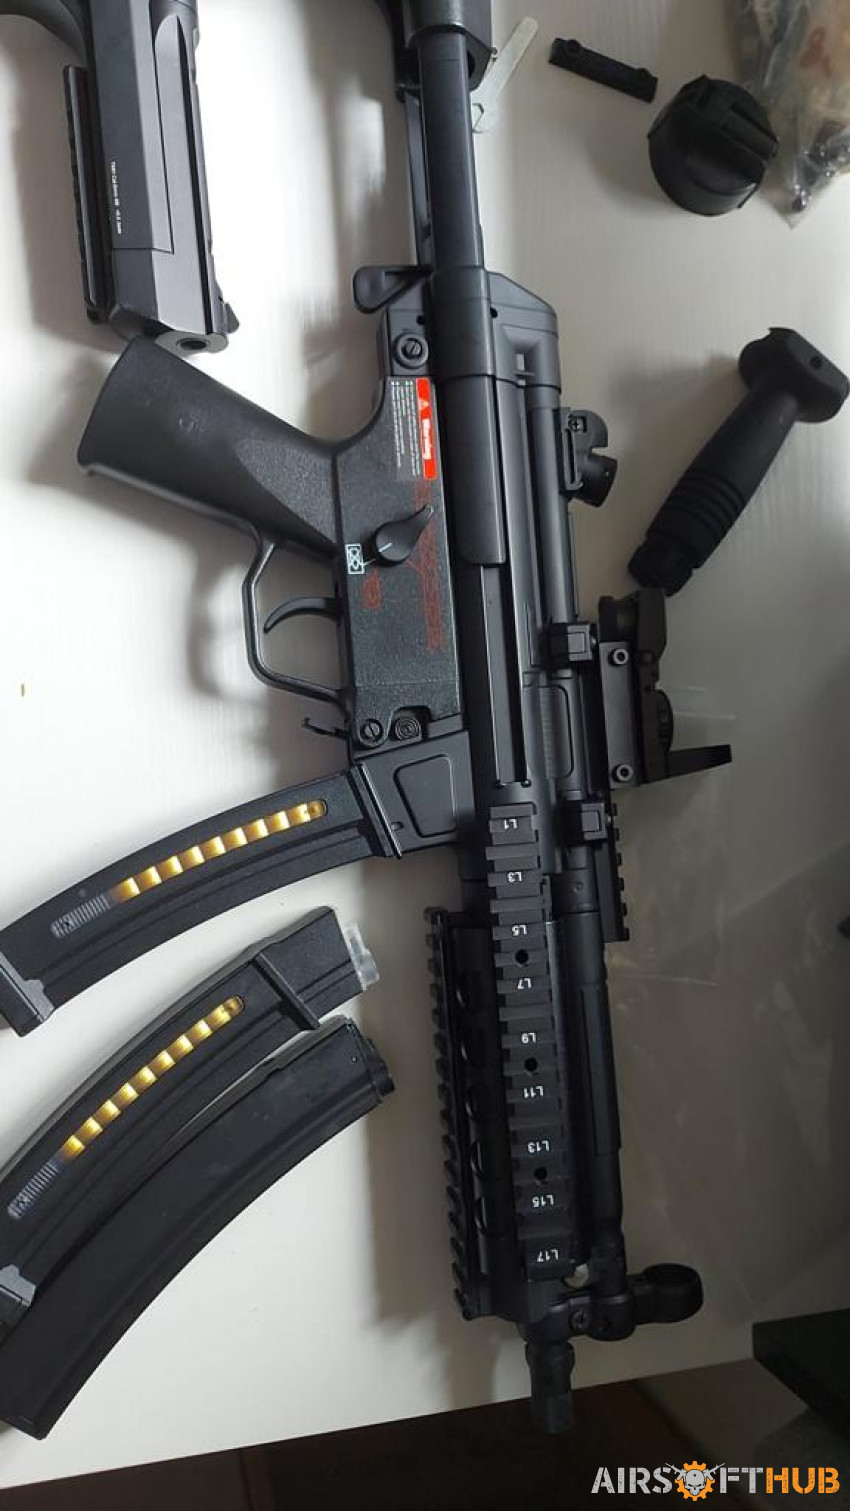 G&G MP5 - Used airsoft equipment